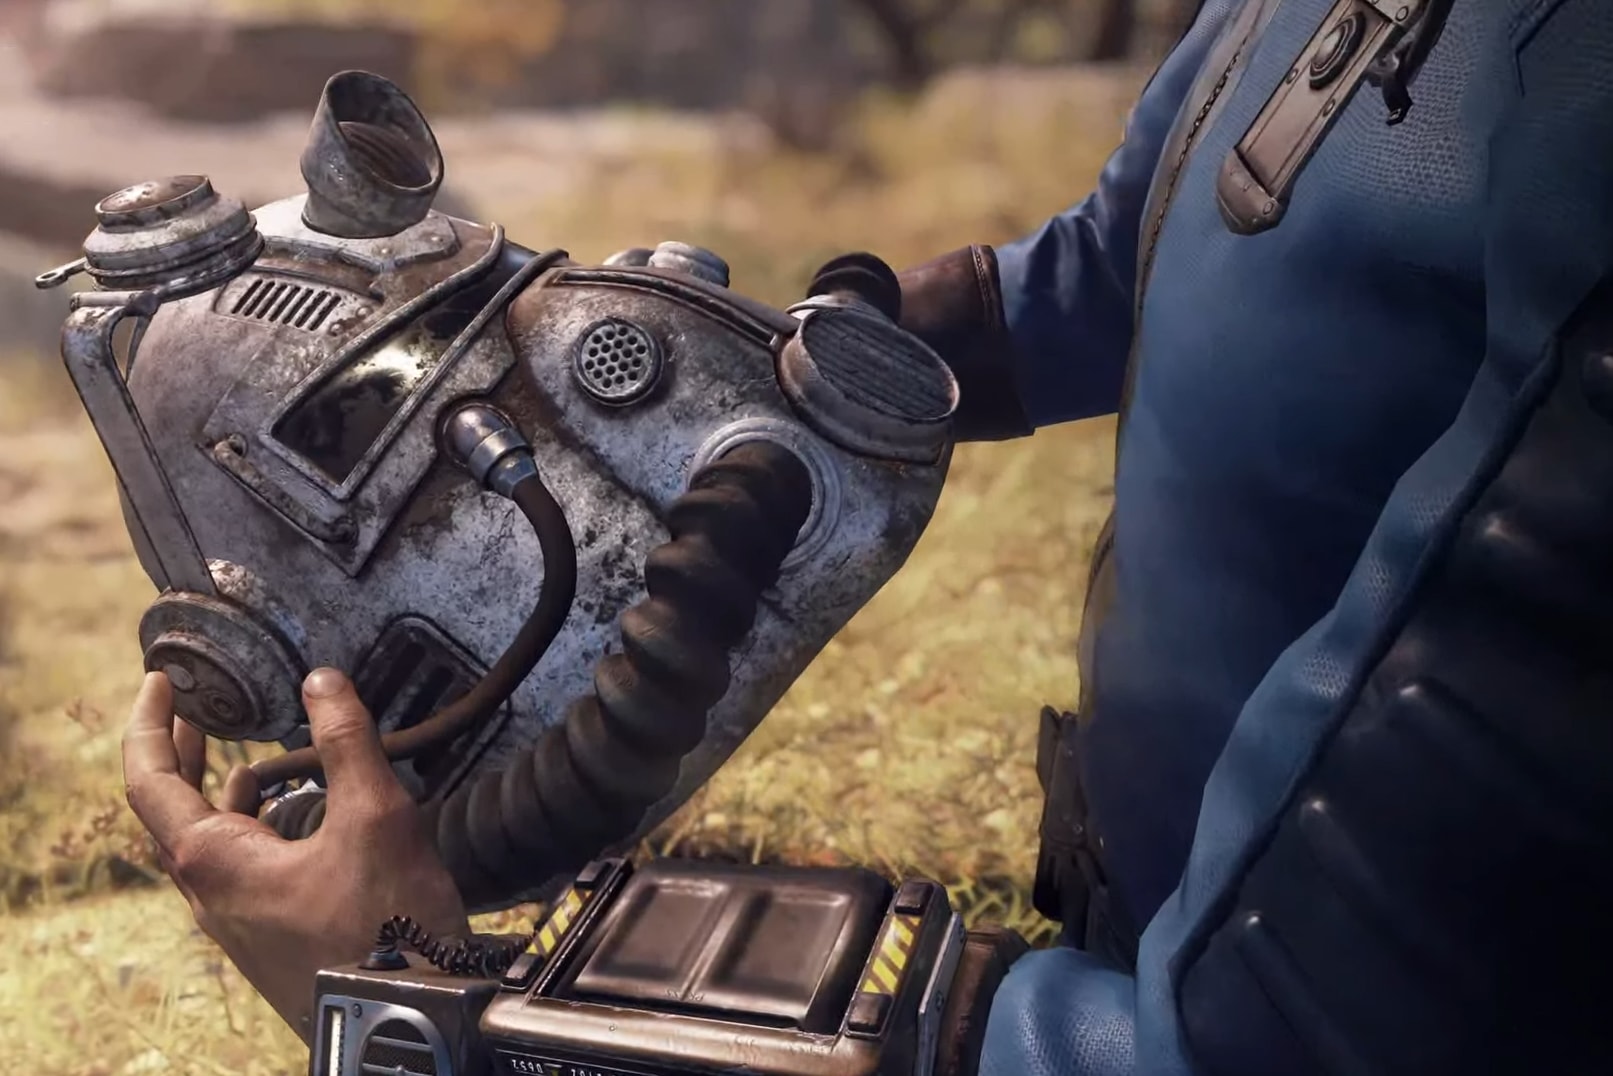 Fallout 76 E3 Reveal Trailer Online Survival RPG Bethesda Developers PlayStation 4 Xbox One